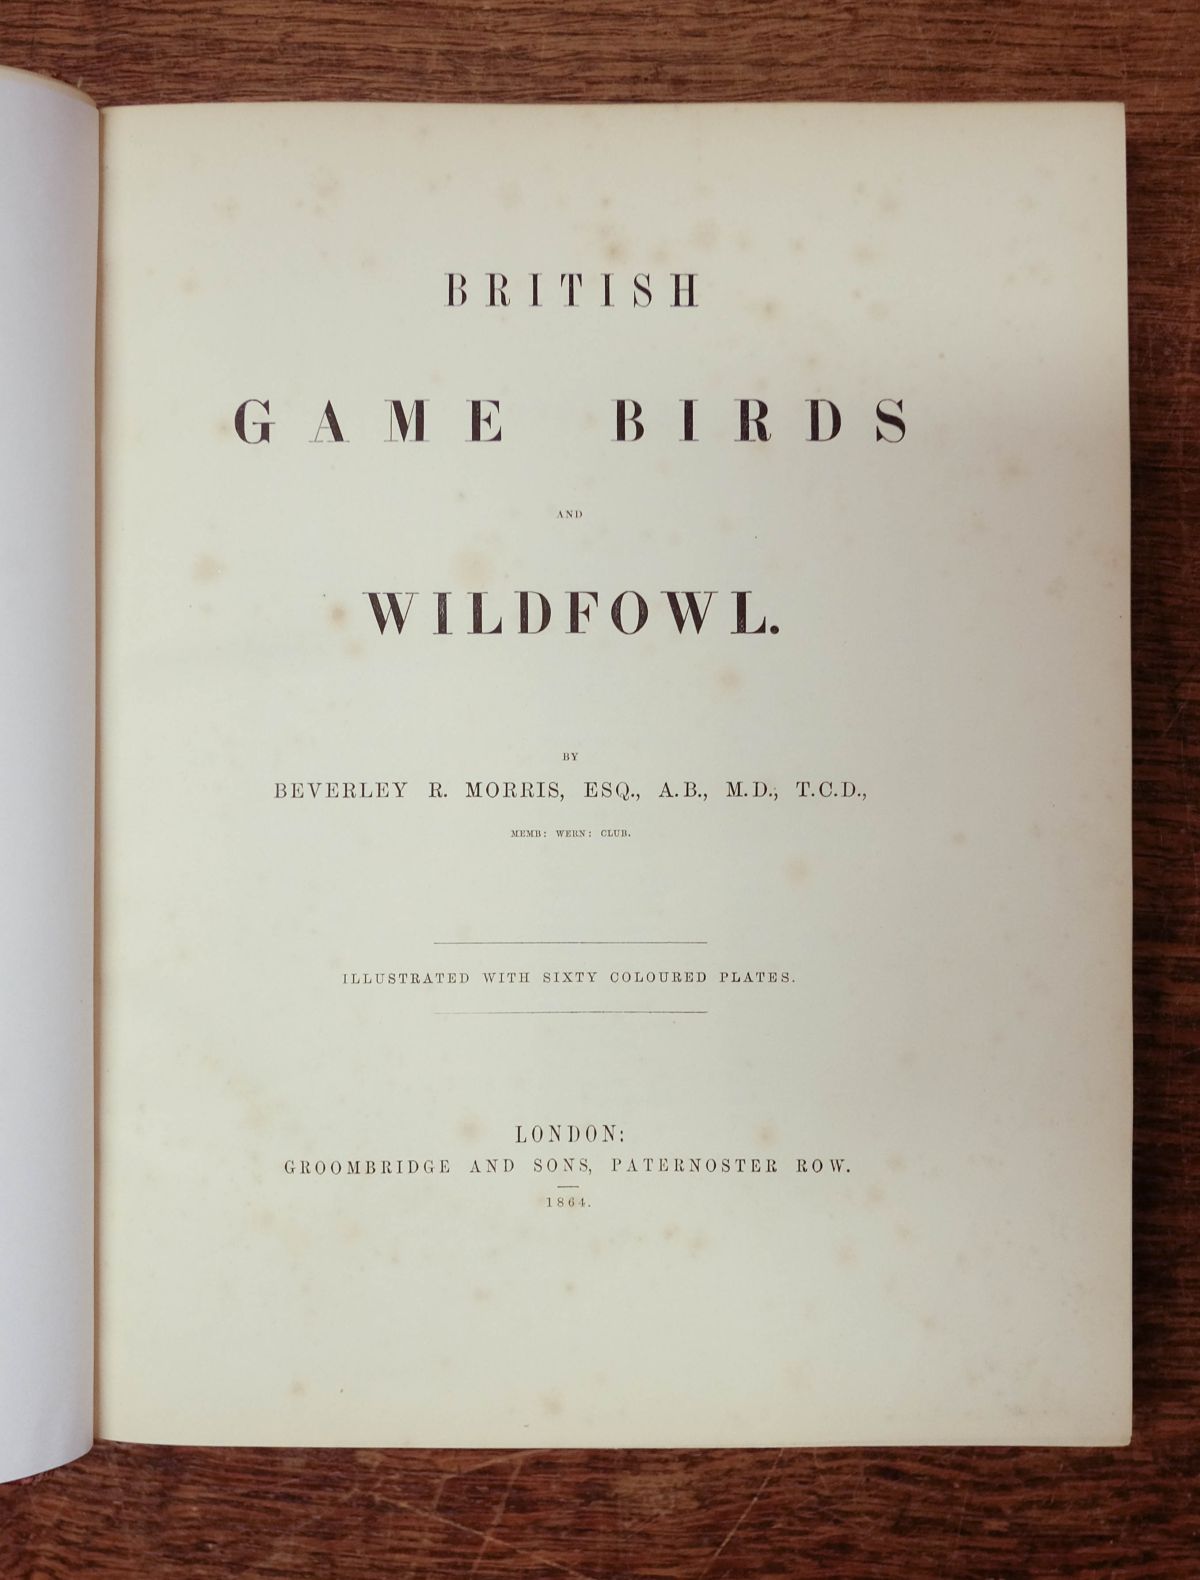 Morris (Beverley R.). British Game Birds and Wildfowl, 1864 - Image 7 of 12